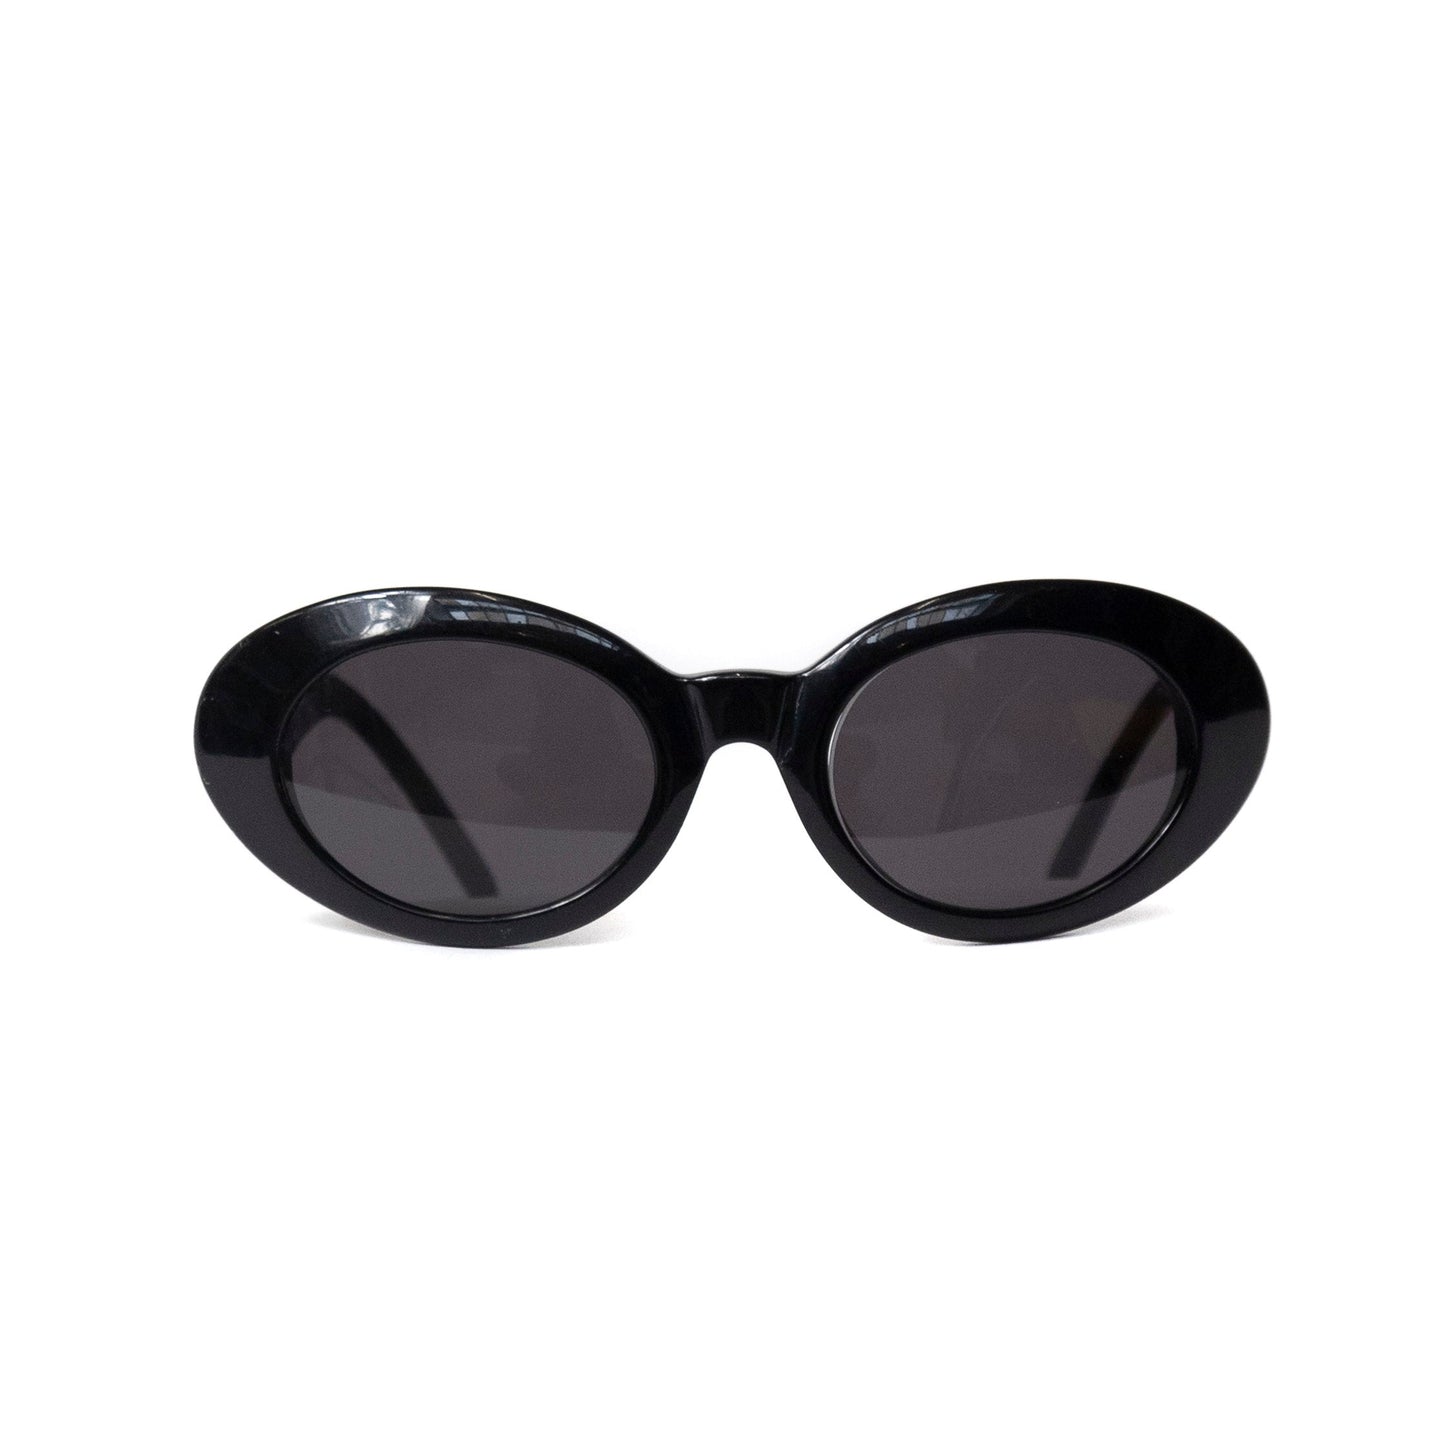 Laura Biagiotti Rounded Blackout Sunglasses